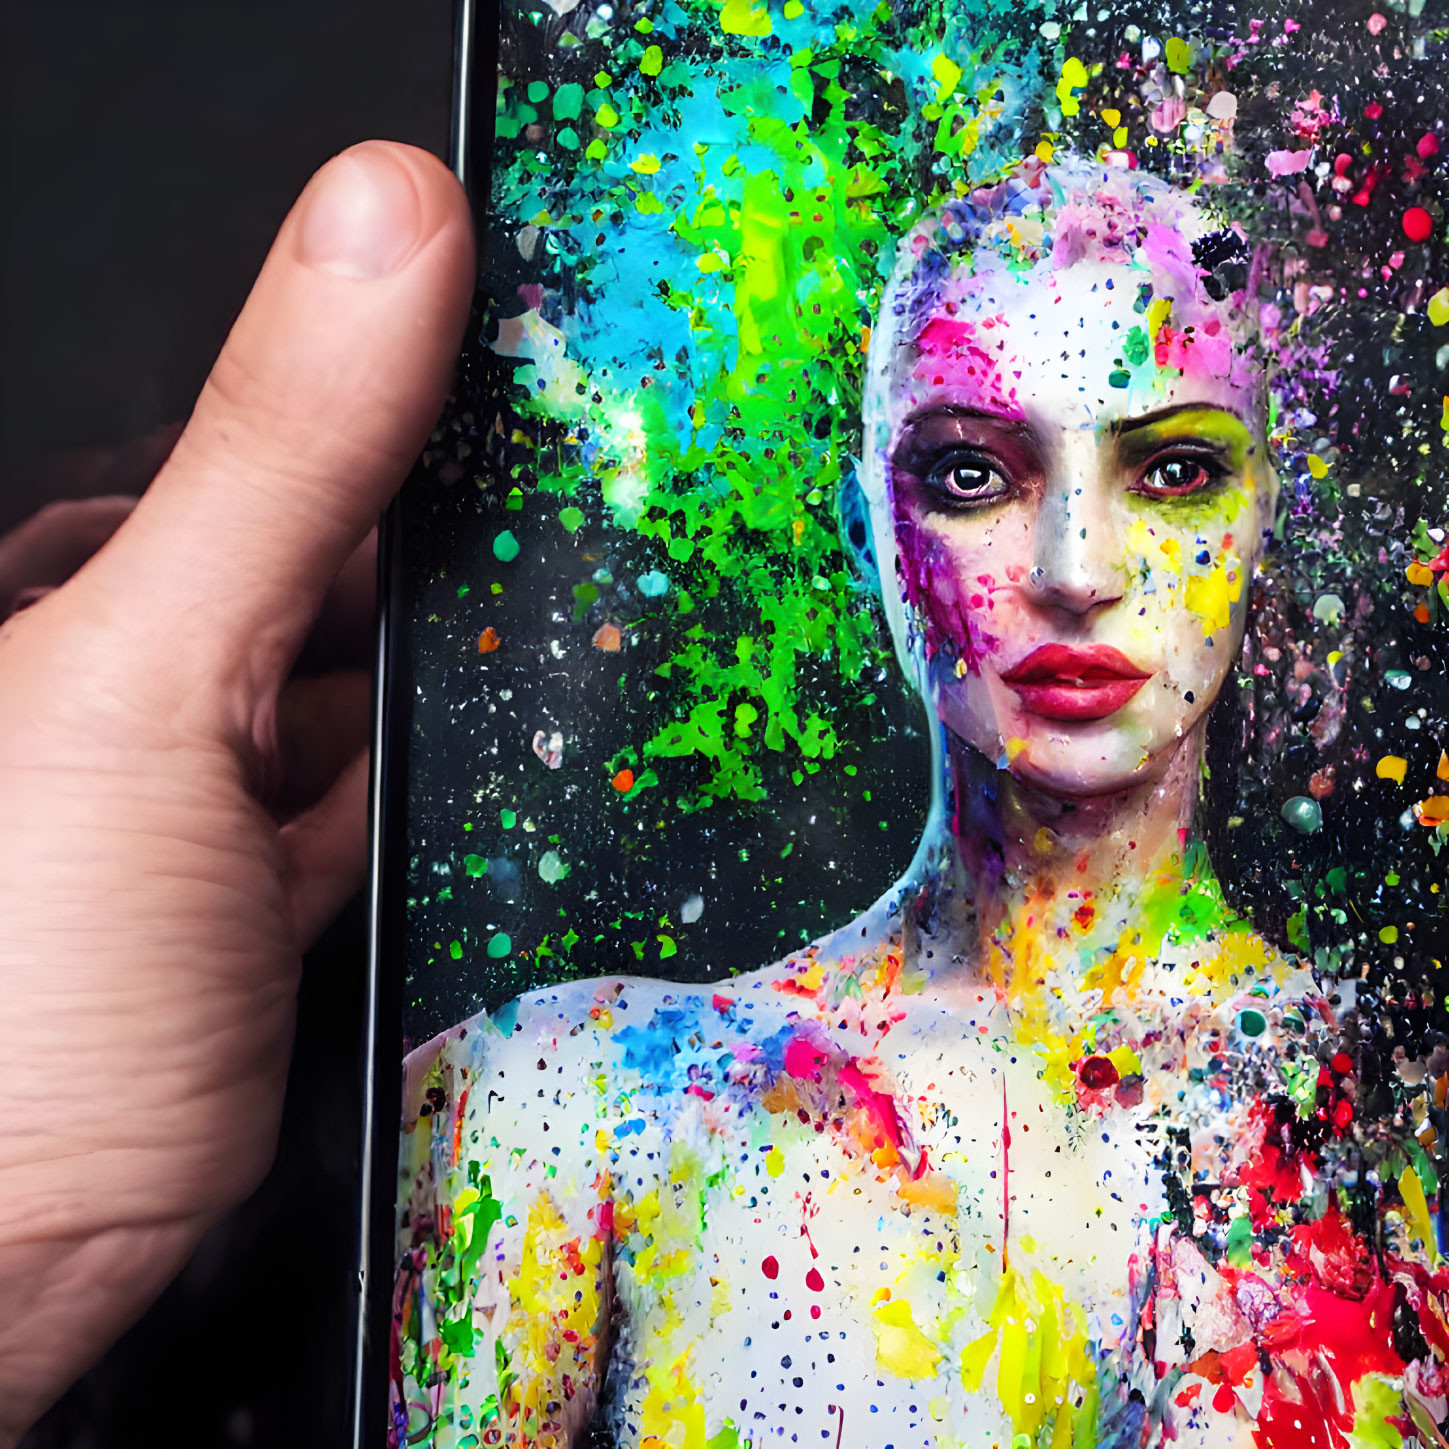 Colorful image of woman with paint splatters on smartphone screen